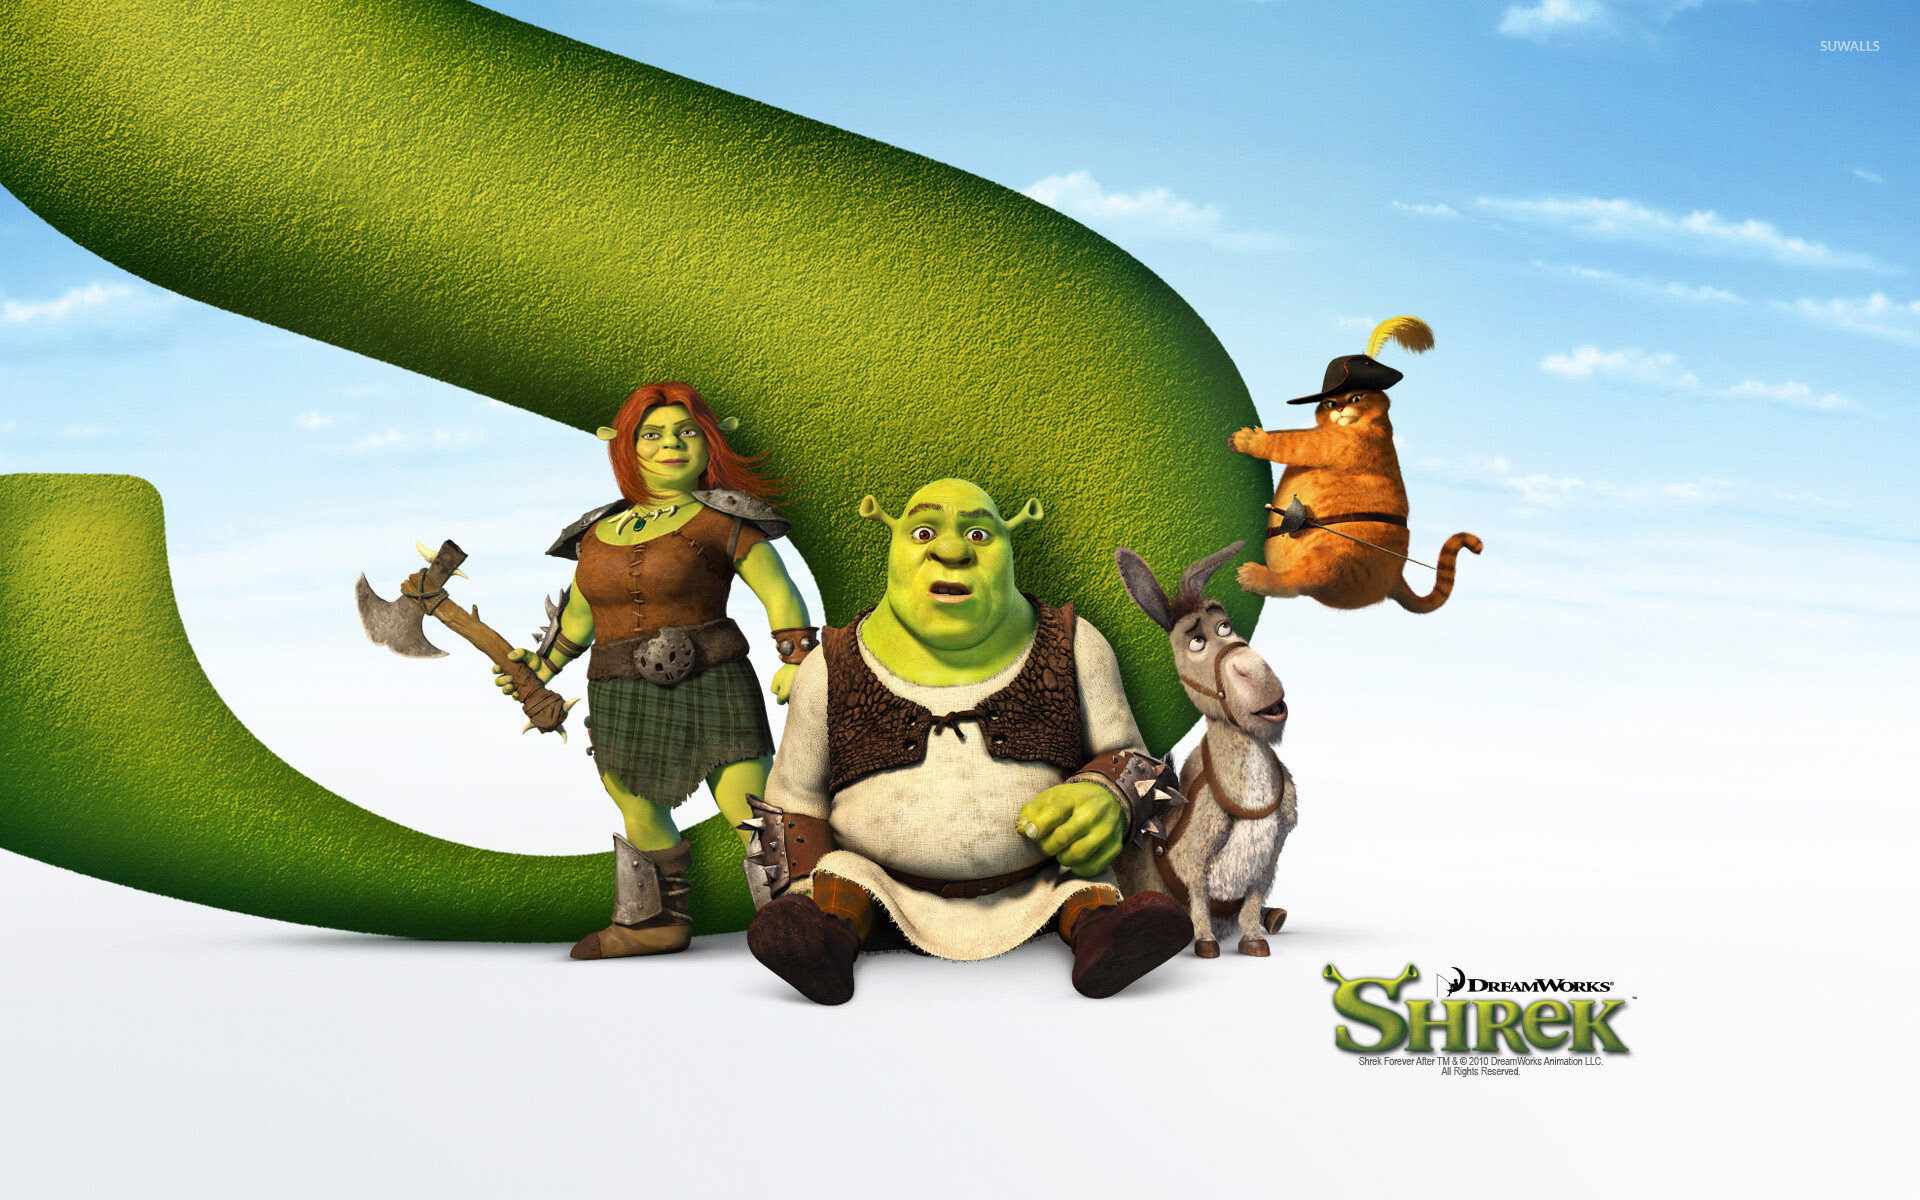 Shrek Forever After wallpaper, Cartoon animation, Funny characters, Adventure theme, 1920x1200 HD Desktop